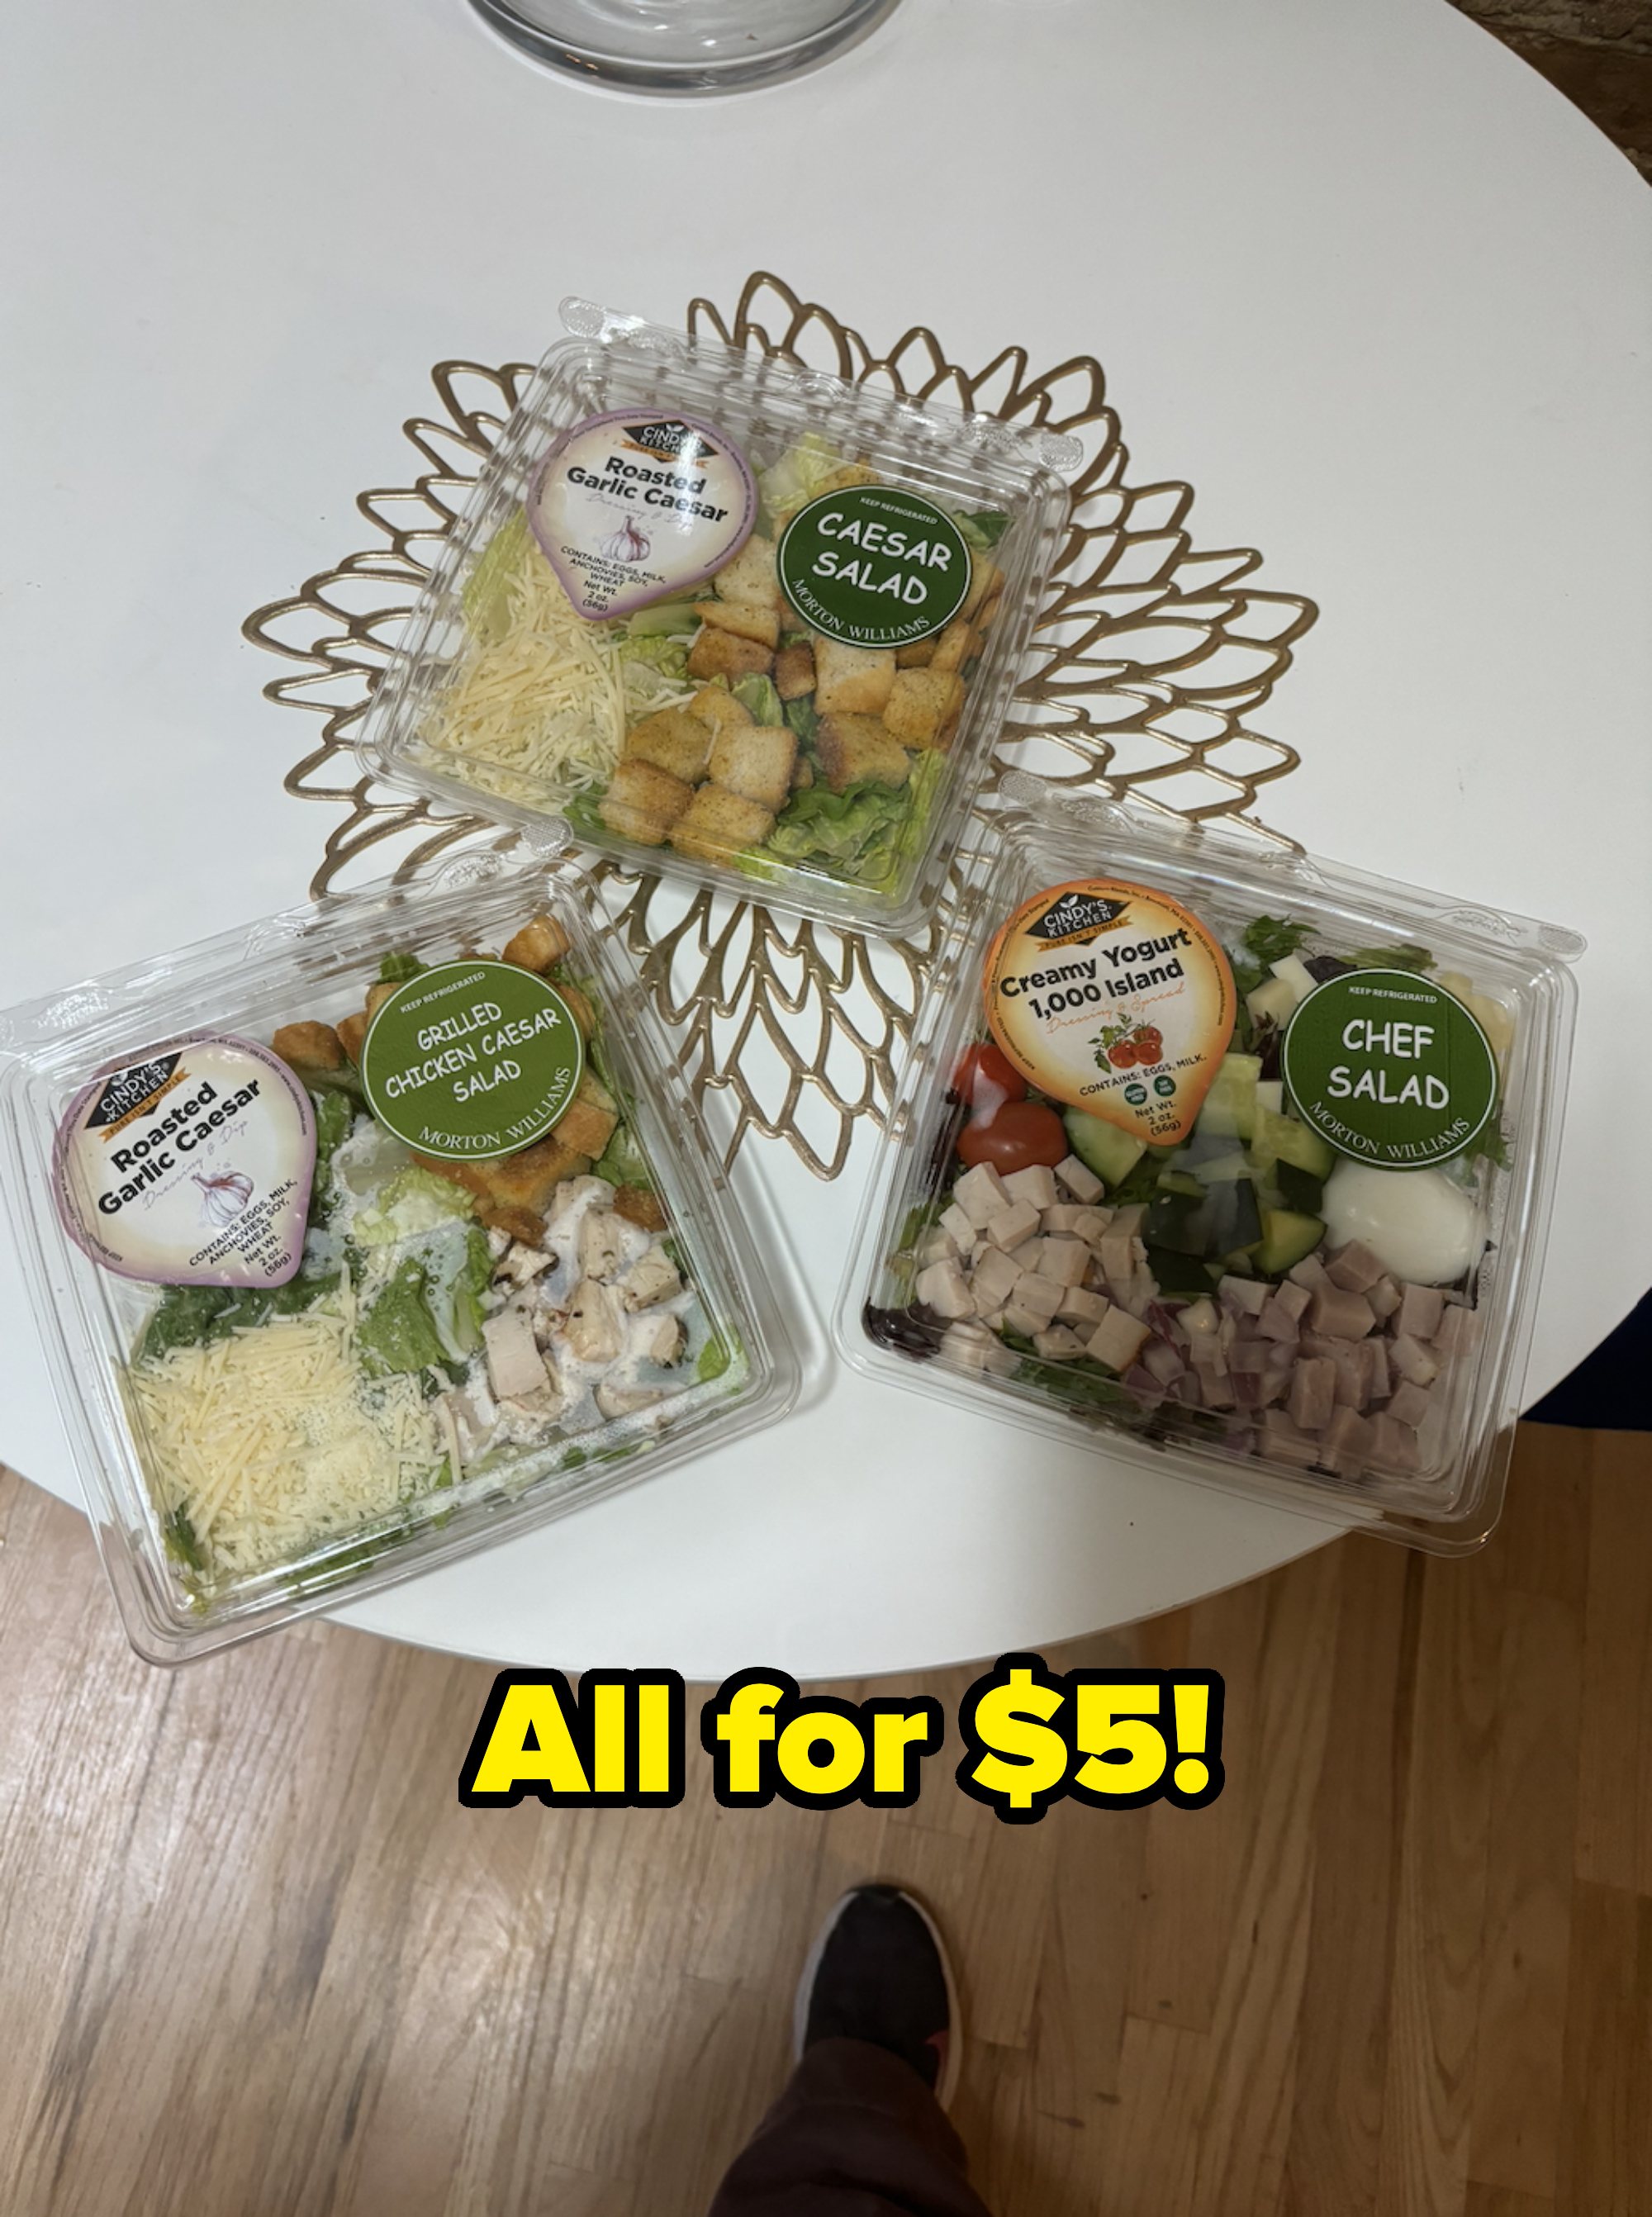 3 packed salads for $5